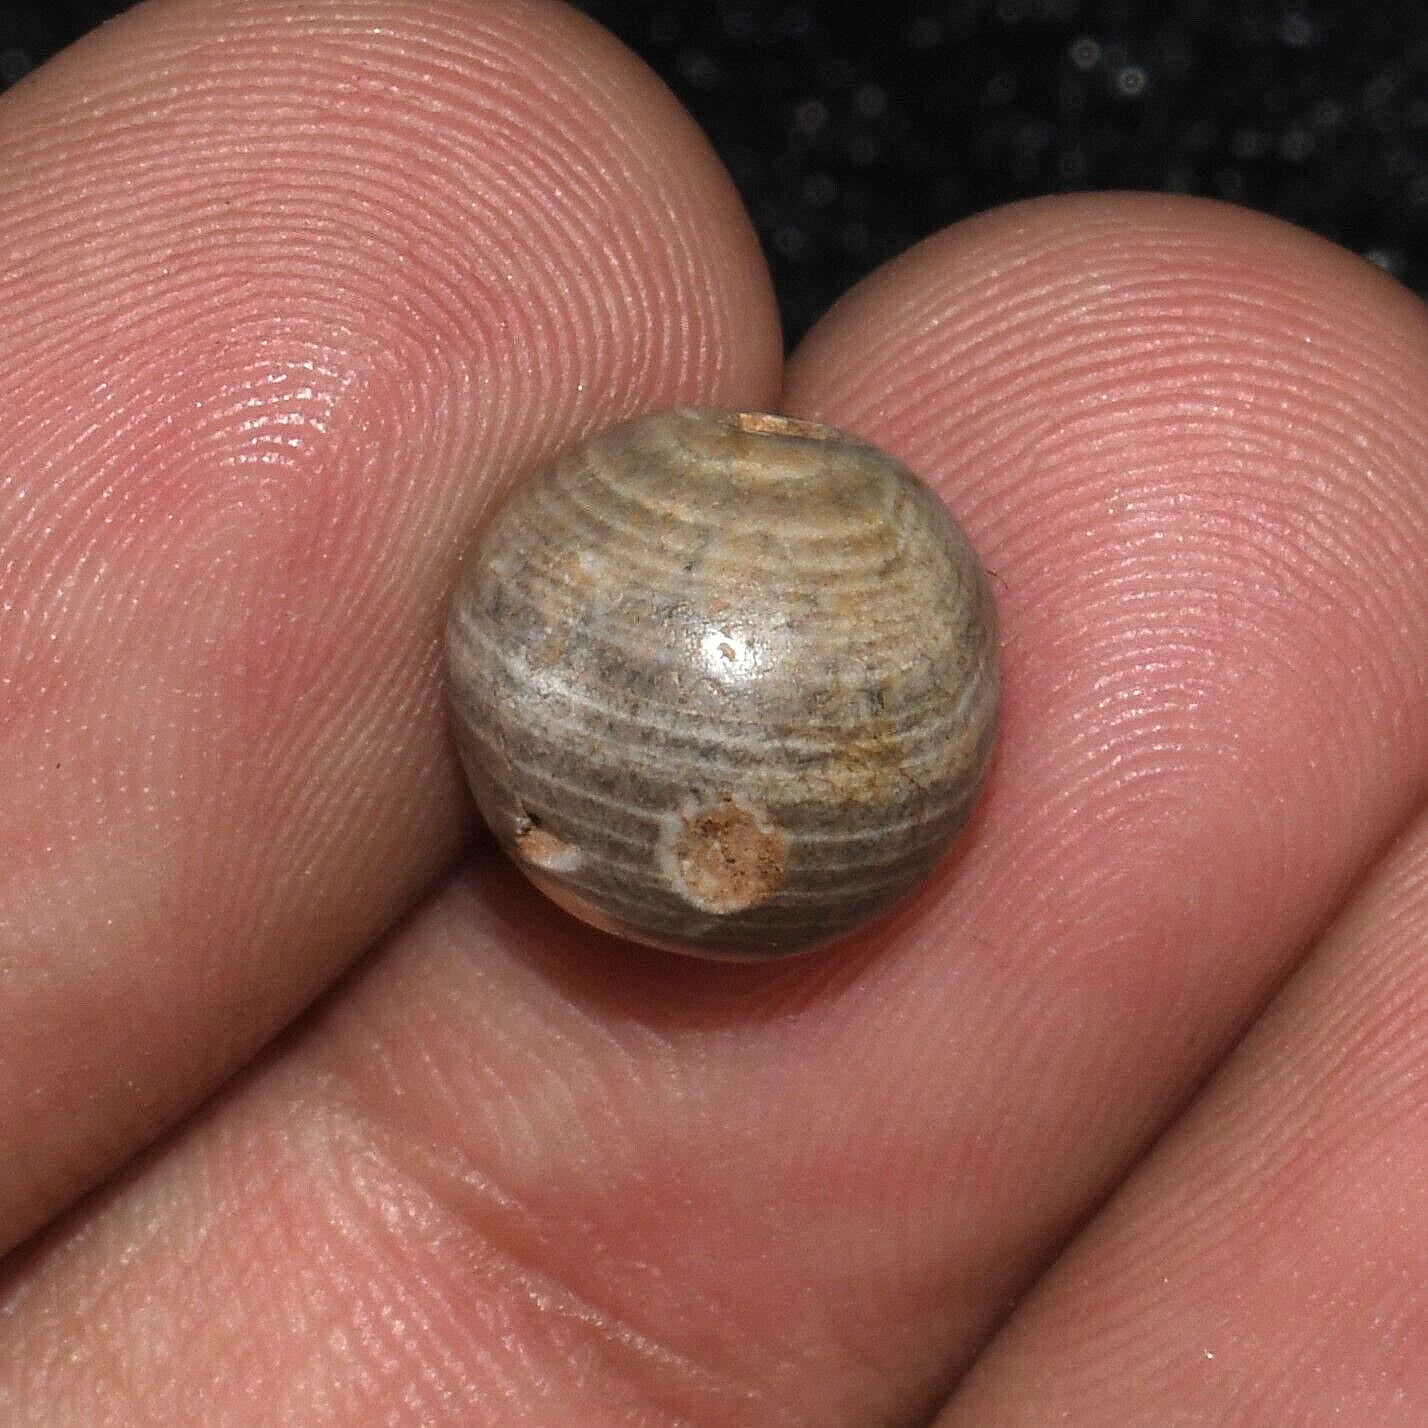 Rare Genuine Ancient Banded Agate Bead over 2000 Years Old in Good Condition